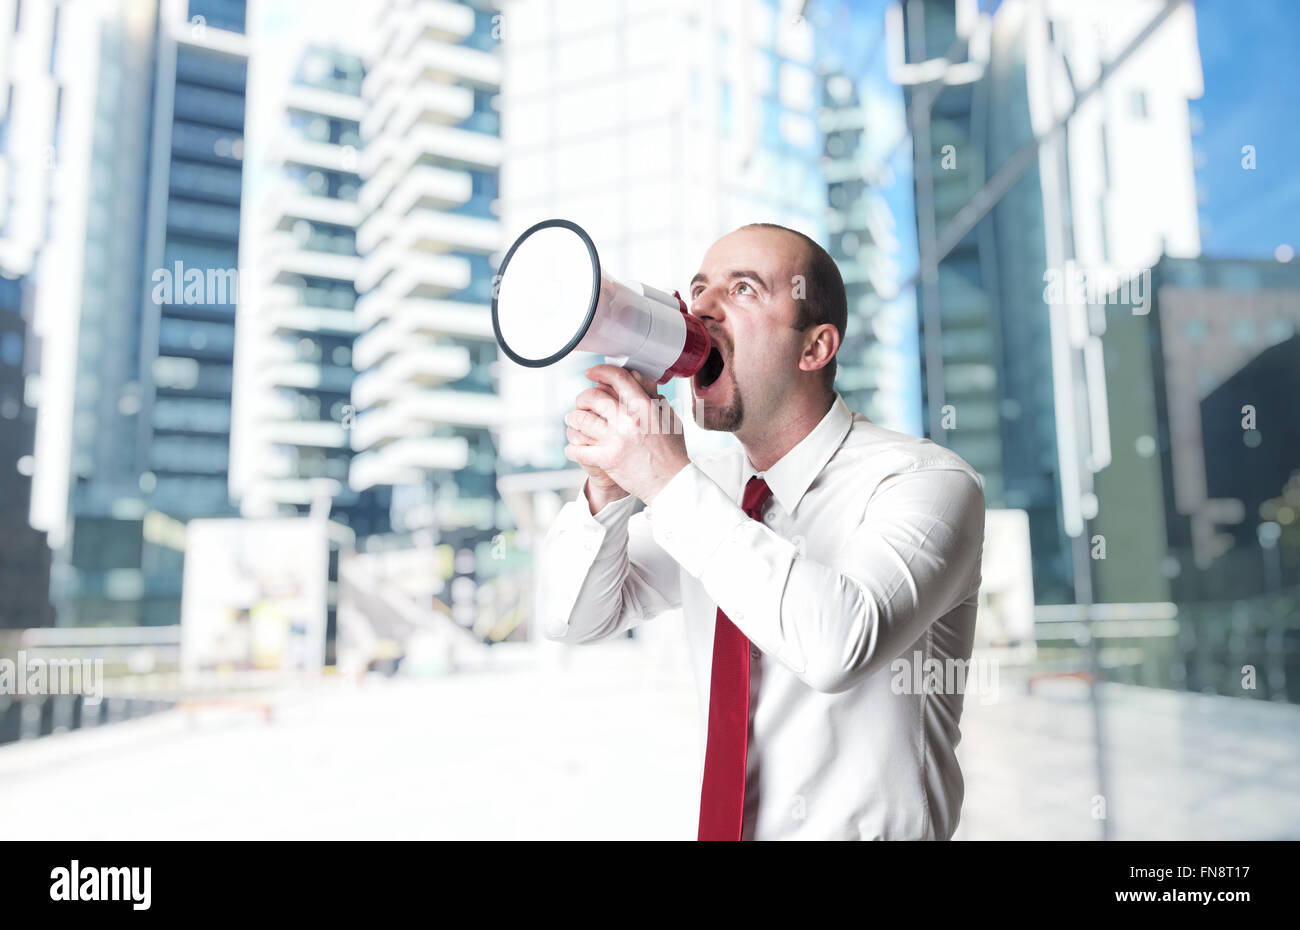 man with megaphone and modern building background Stock Photo